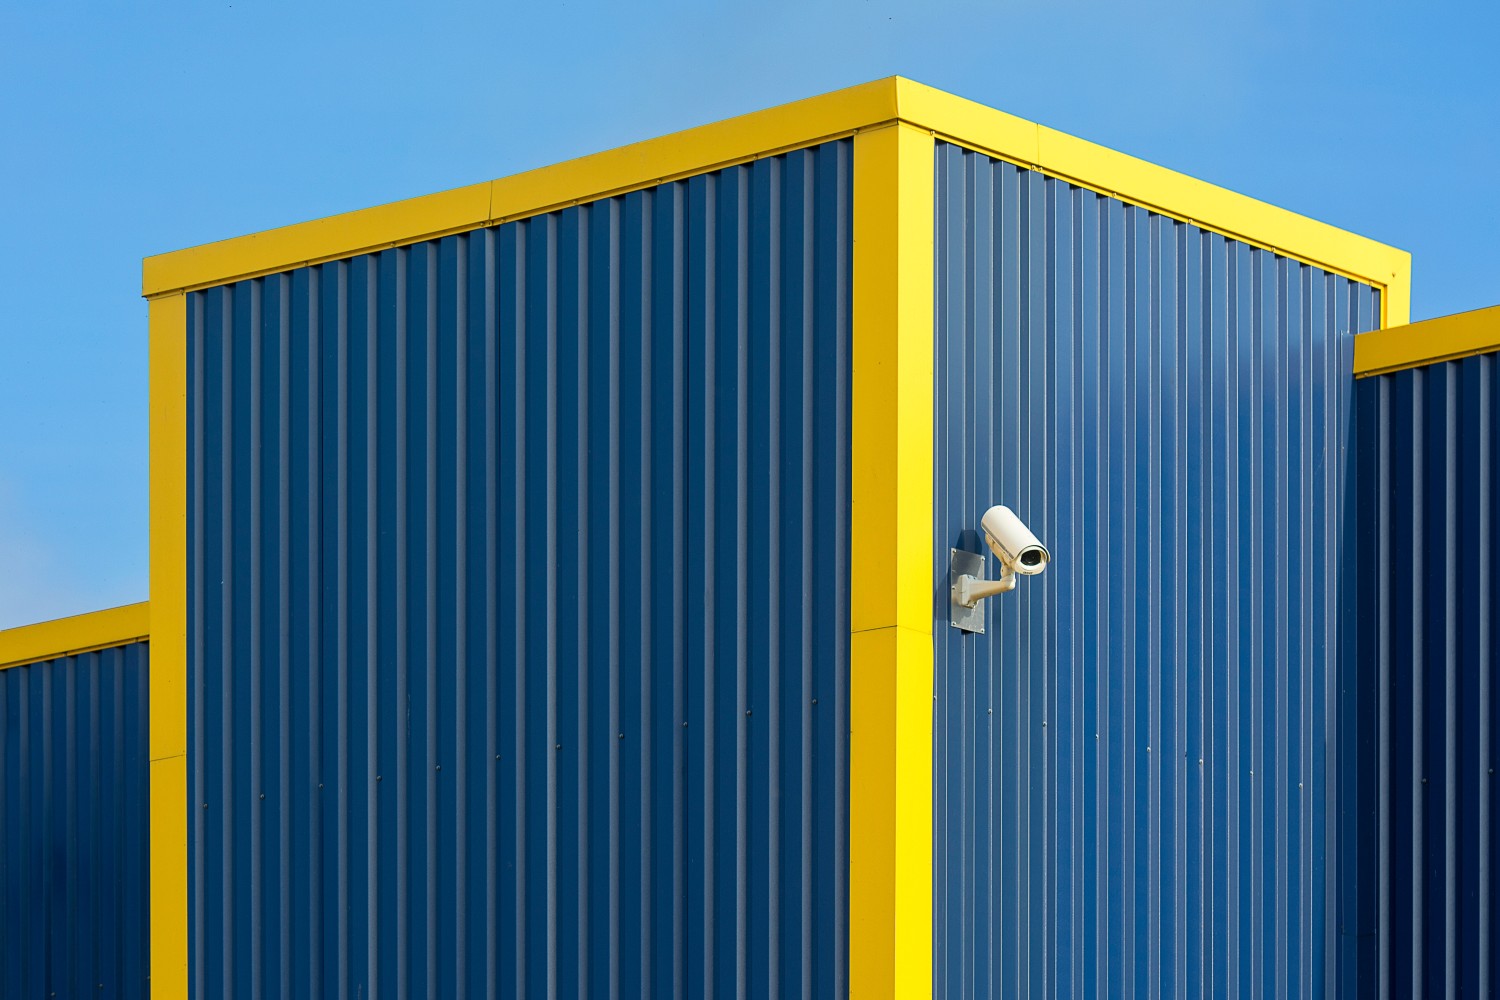 a-security-camera-on-a-metal-decking-wall